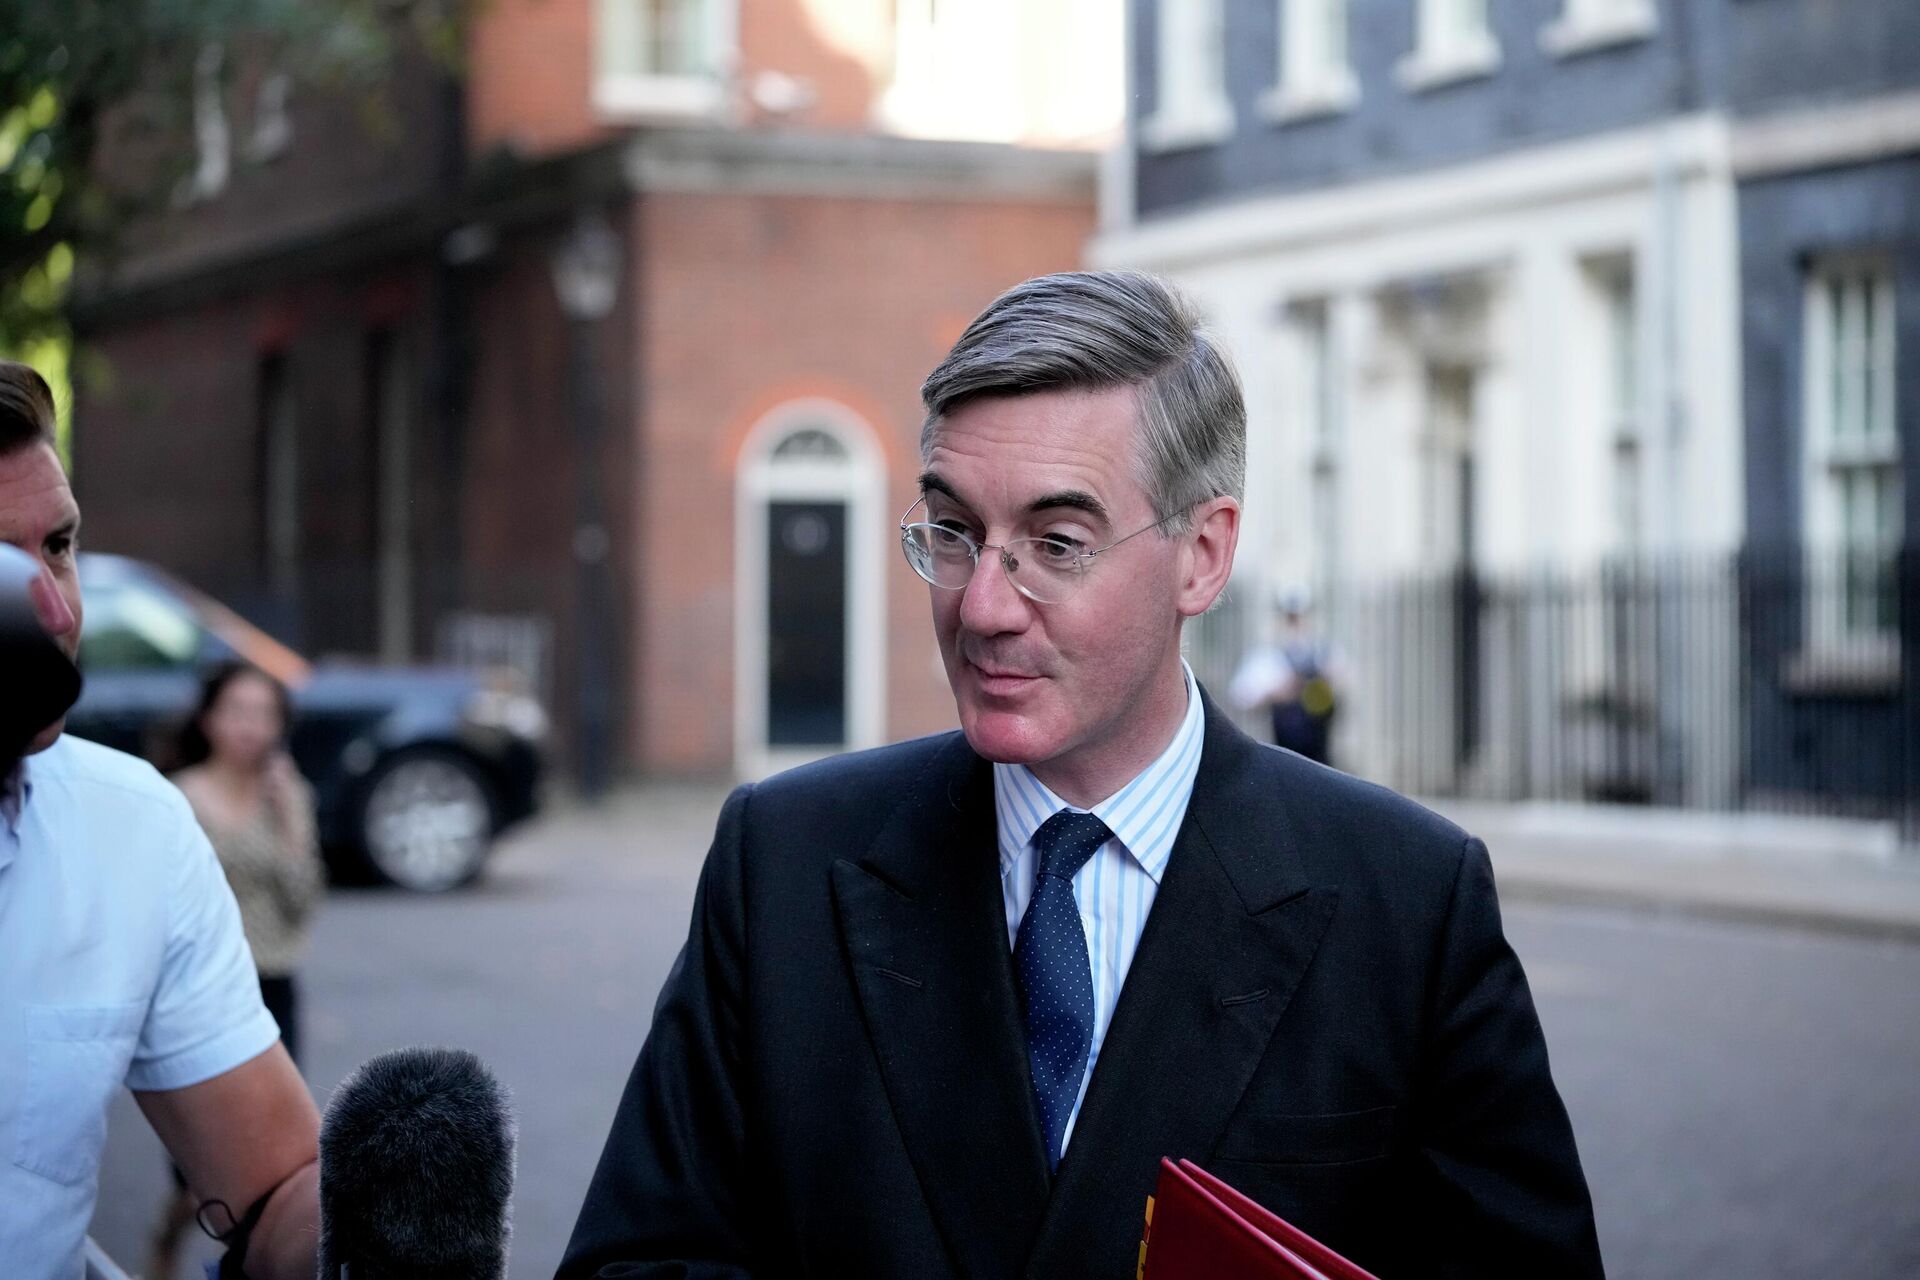 Jacob Rees-Mogg, now Brexit Opportunities and Government Efficiency Secretary, leaves a cabinet meeting on September 7 2021 - Sputnik International, 1920, 02.07.2022